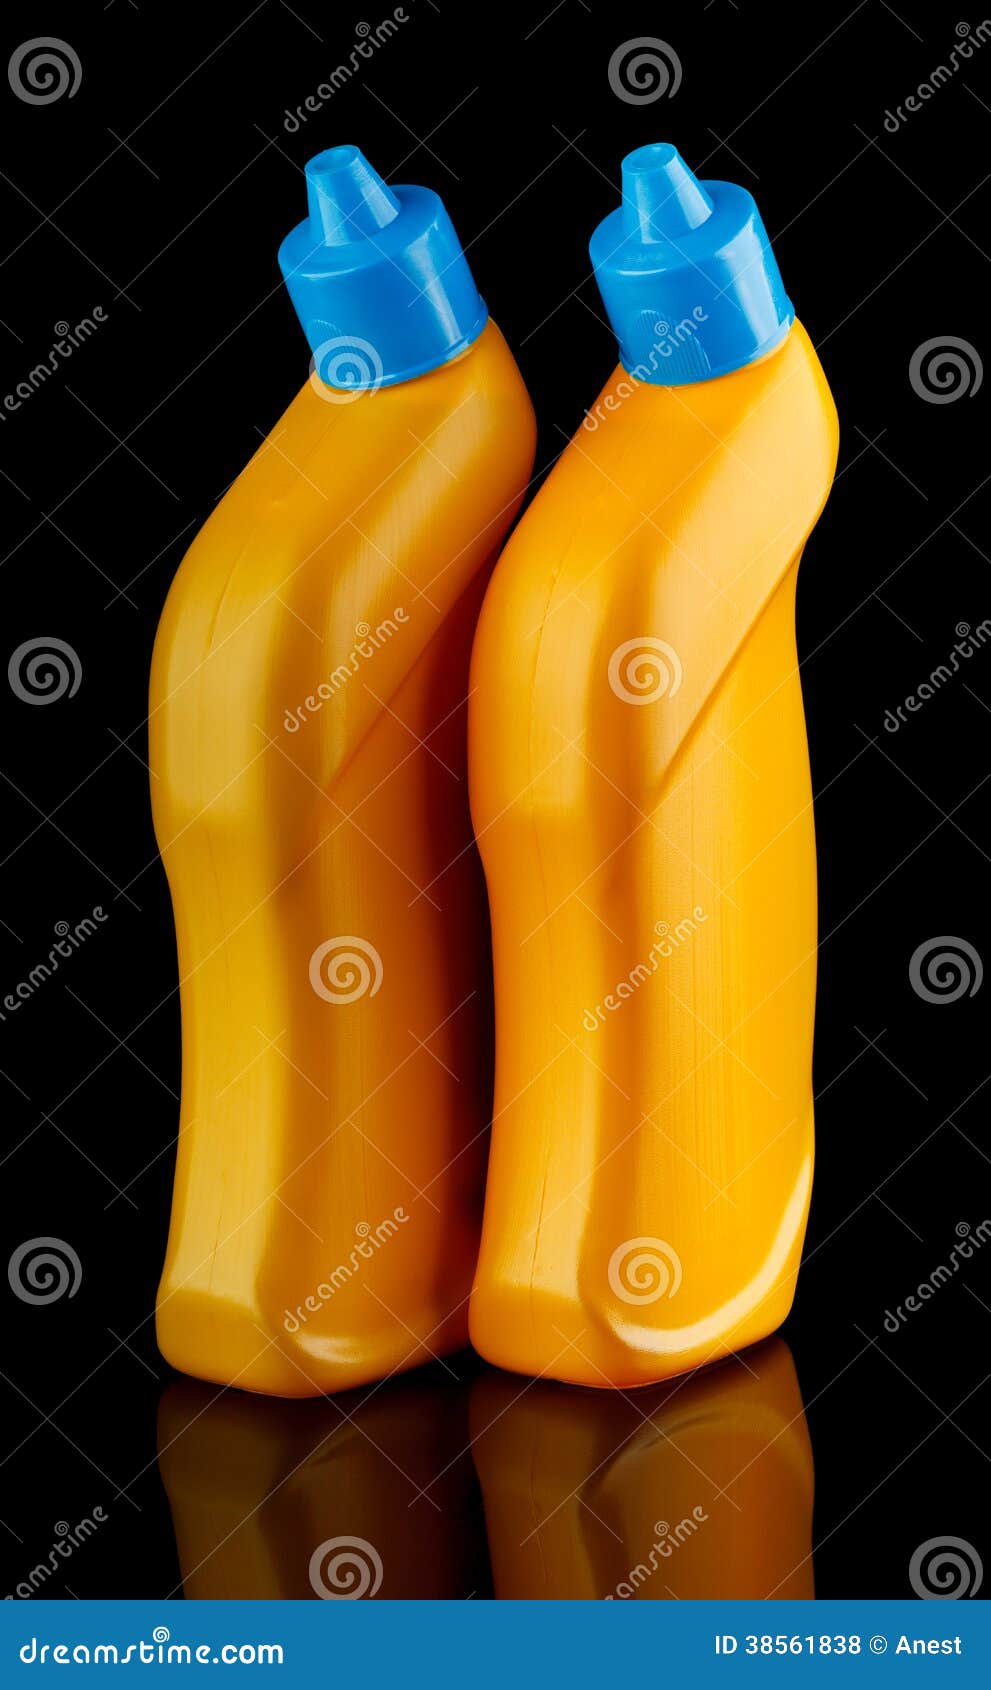 Download Two Yellow Bottles With Detergent Stock Photo Image Of Bottle Fluid 38561838 Yellowimages Mockups